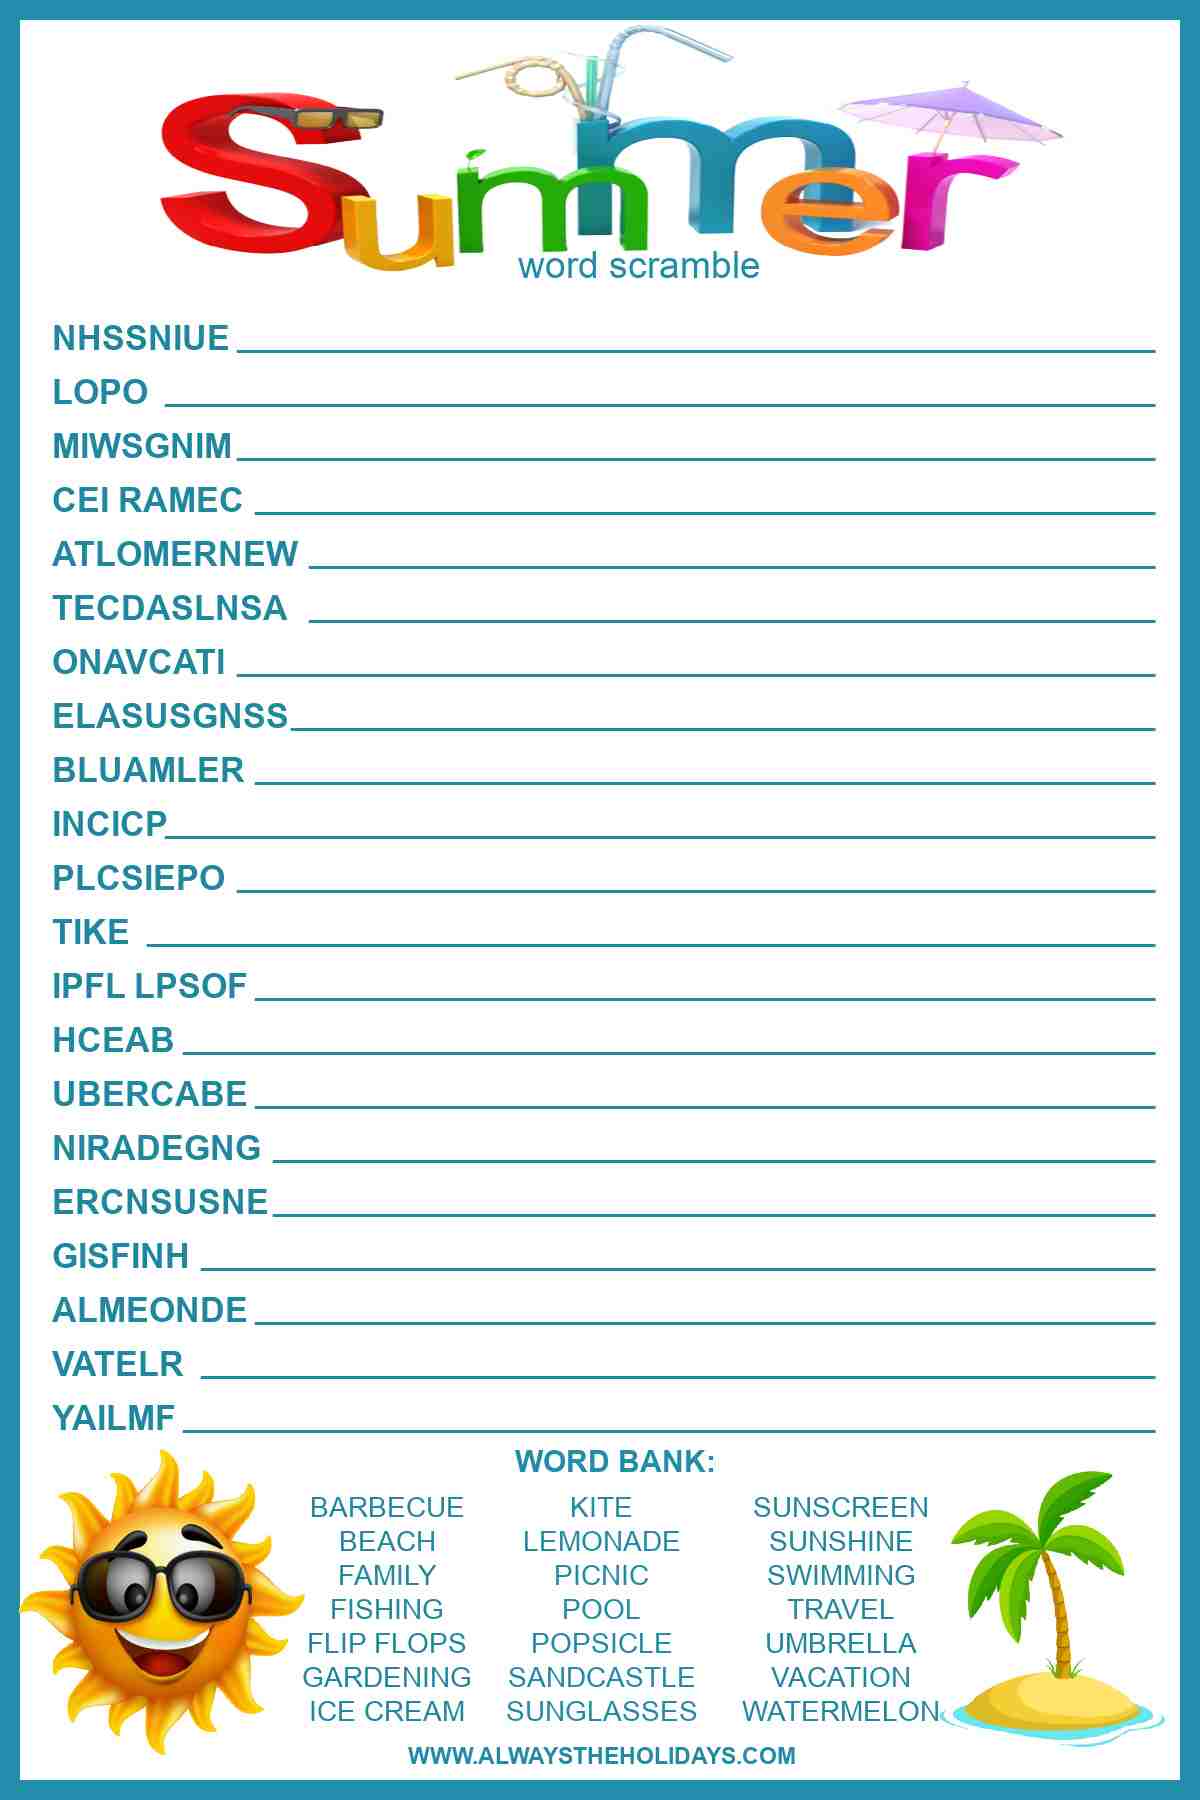 A summer printable word scramble for kids with the word "summer" at the top in rainbow letters and a word bank at the bottom.